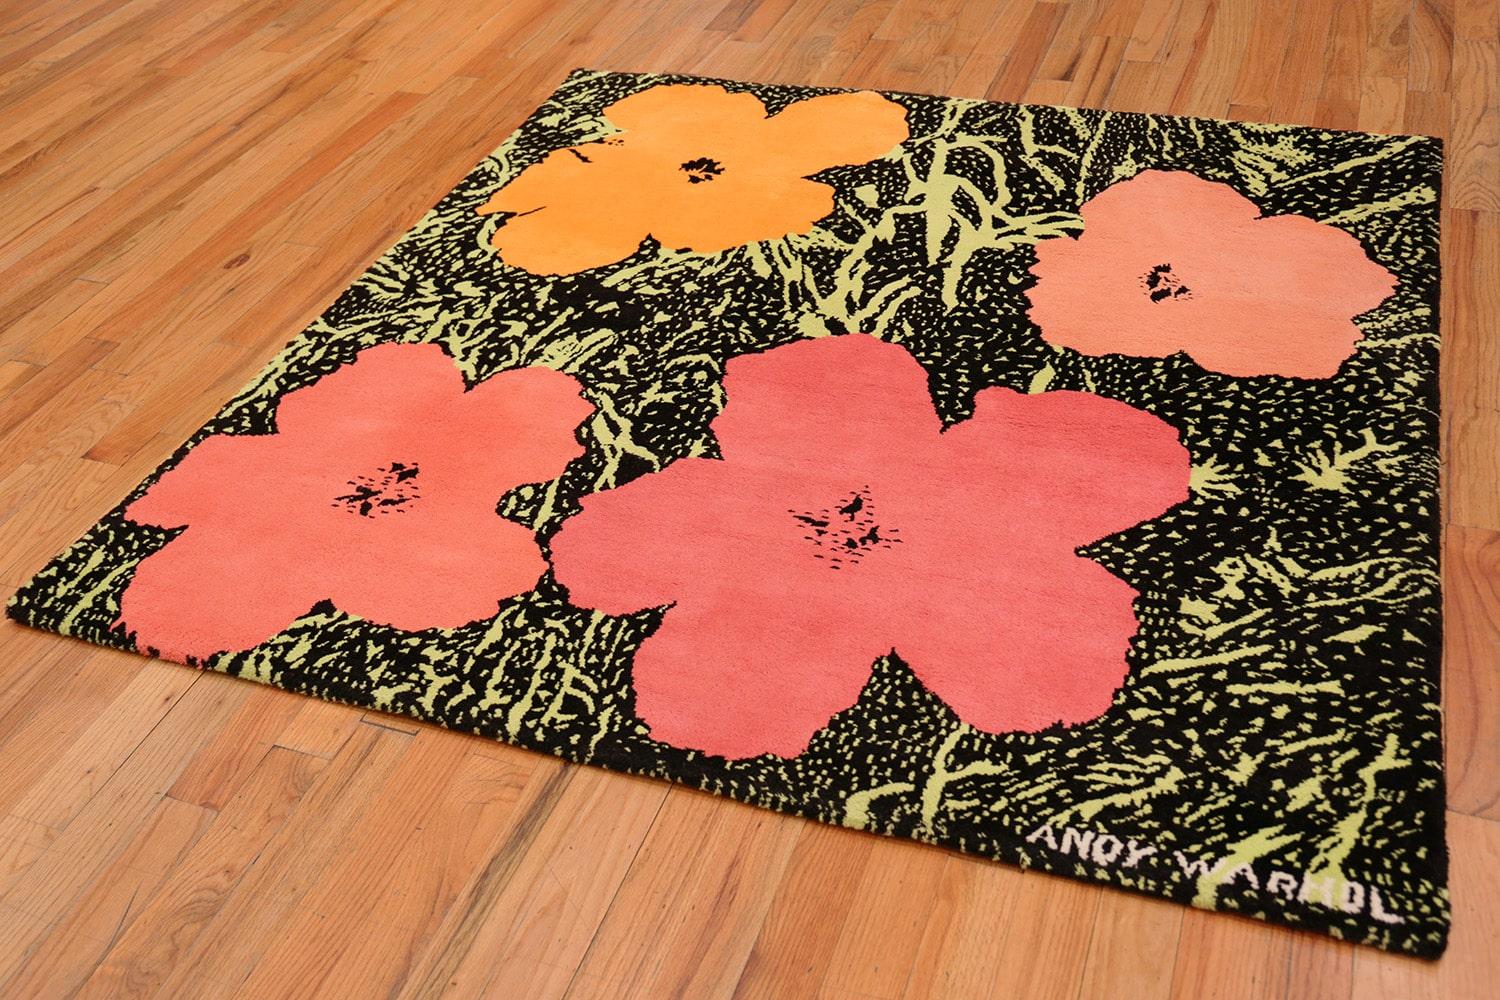 Beautiful and extremely artistic vintage Andy Warhol flowers rug, Country of origin / Rug type: Indian, circa date: Mid-century. Size: 6 ft x 6 ft (1.83 m x 1.83 m)

The works of artist Andy Warhol are some of the most iconic and recognizable of the